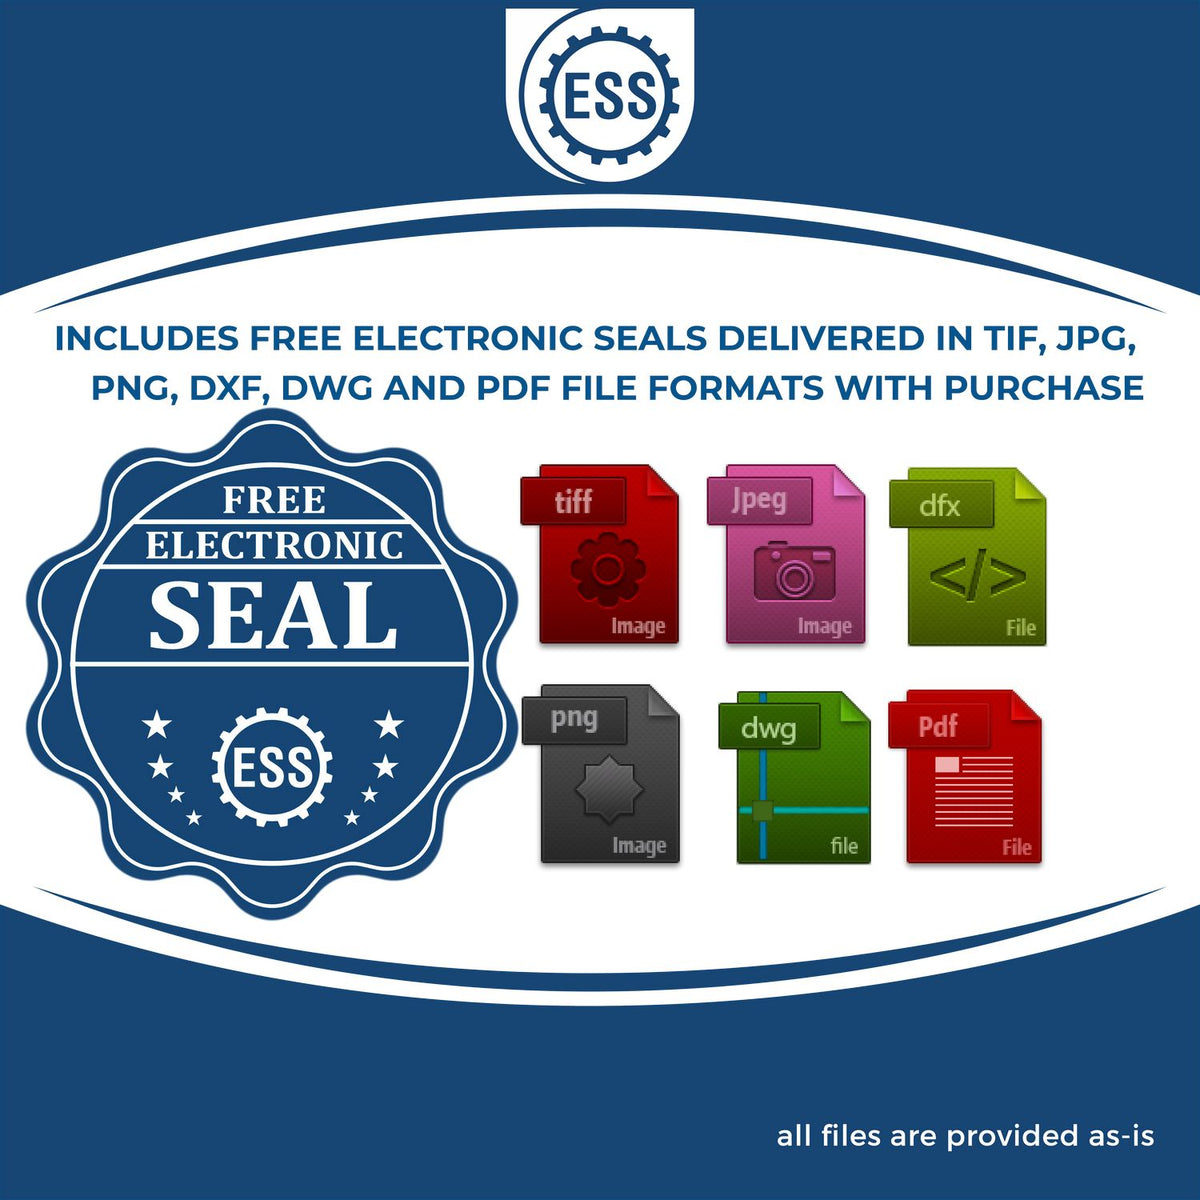 An infographic for the free electronic seal for the Hybrid New York Landscape Architect Seal illustrating the different file type icons such as DXF, DWG, TIF, JPG and PNG.